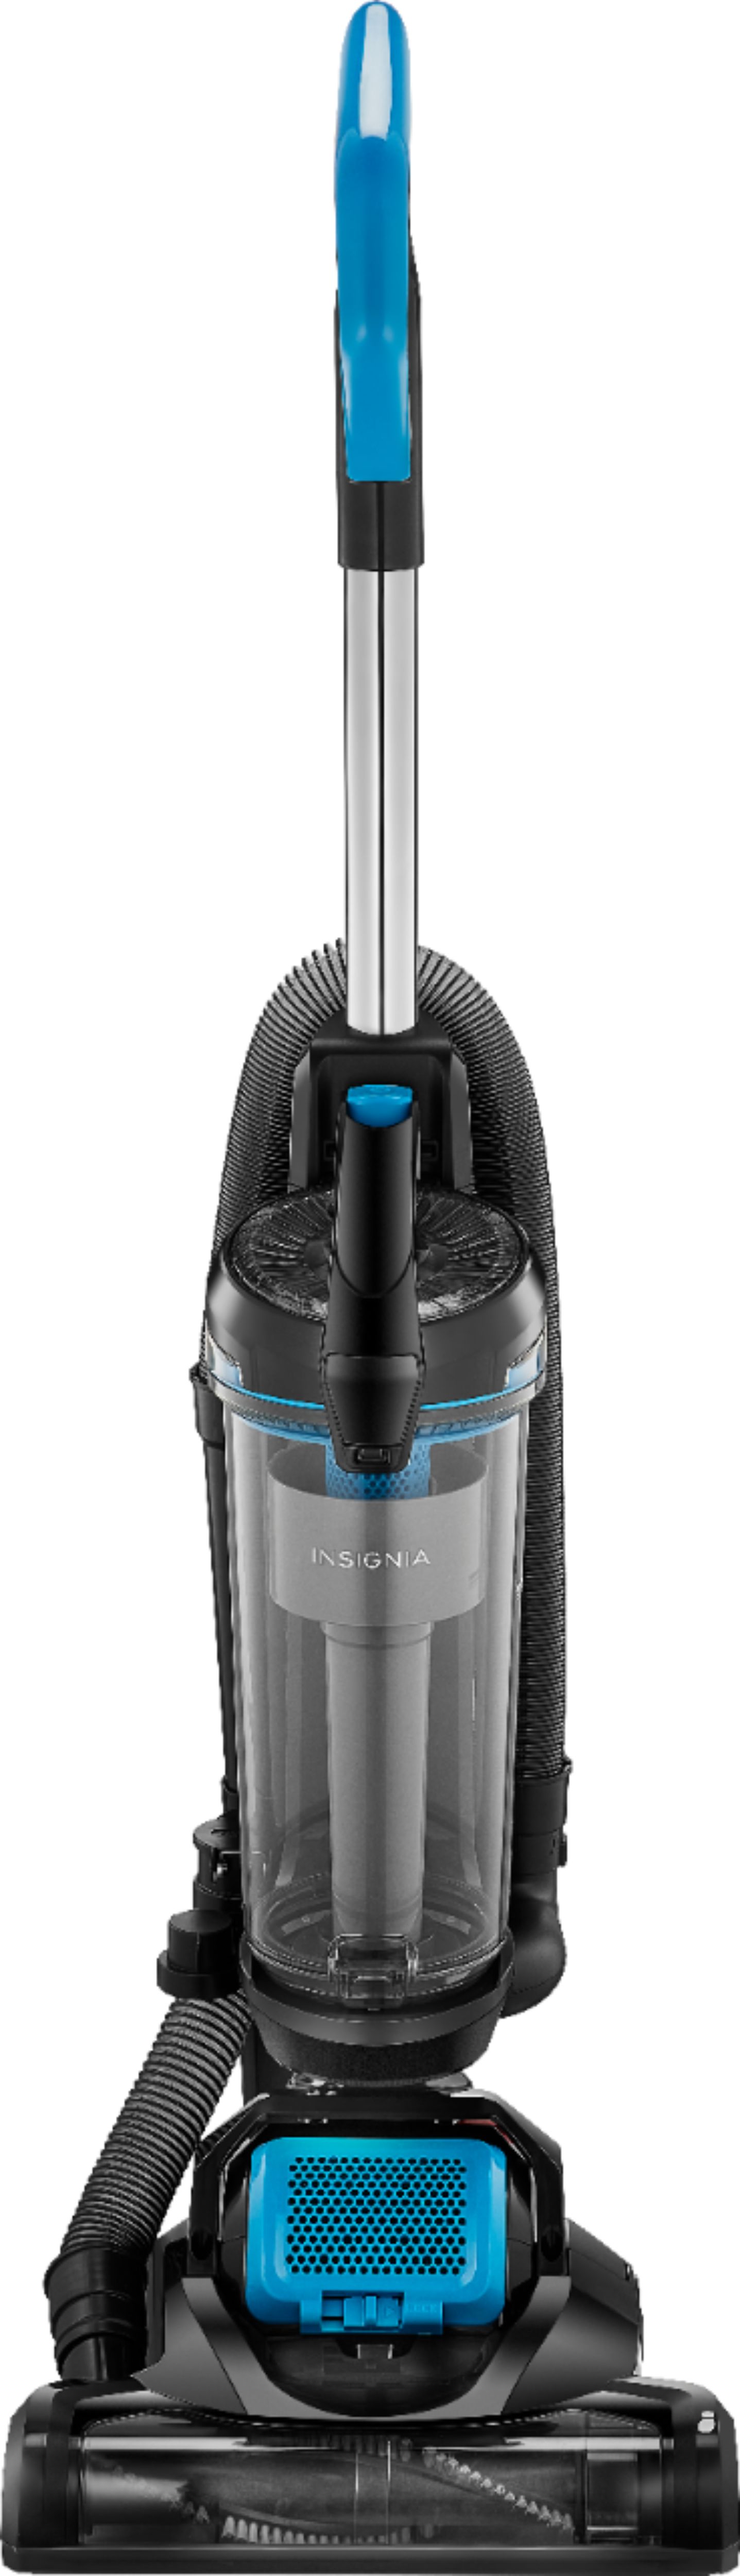 BLACK+DECKER Vacuum Cleaners with Rotating Brushes for Sale